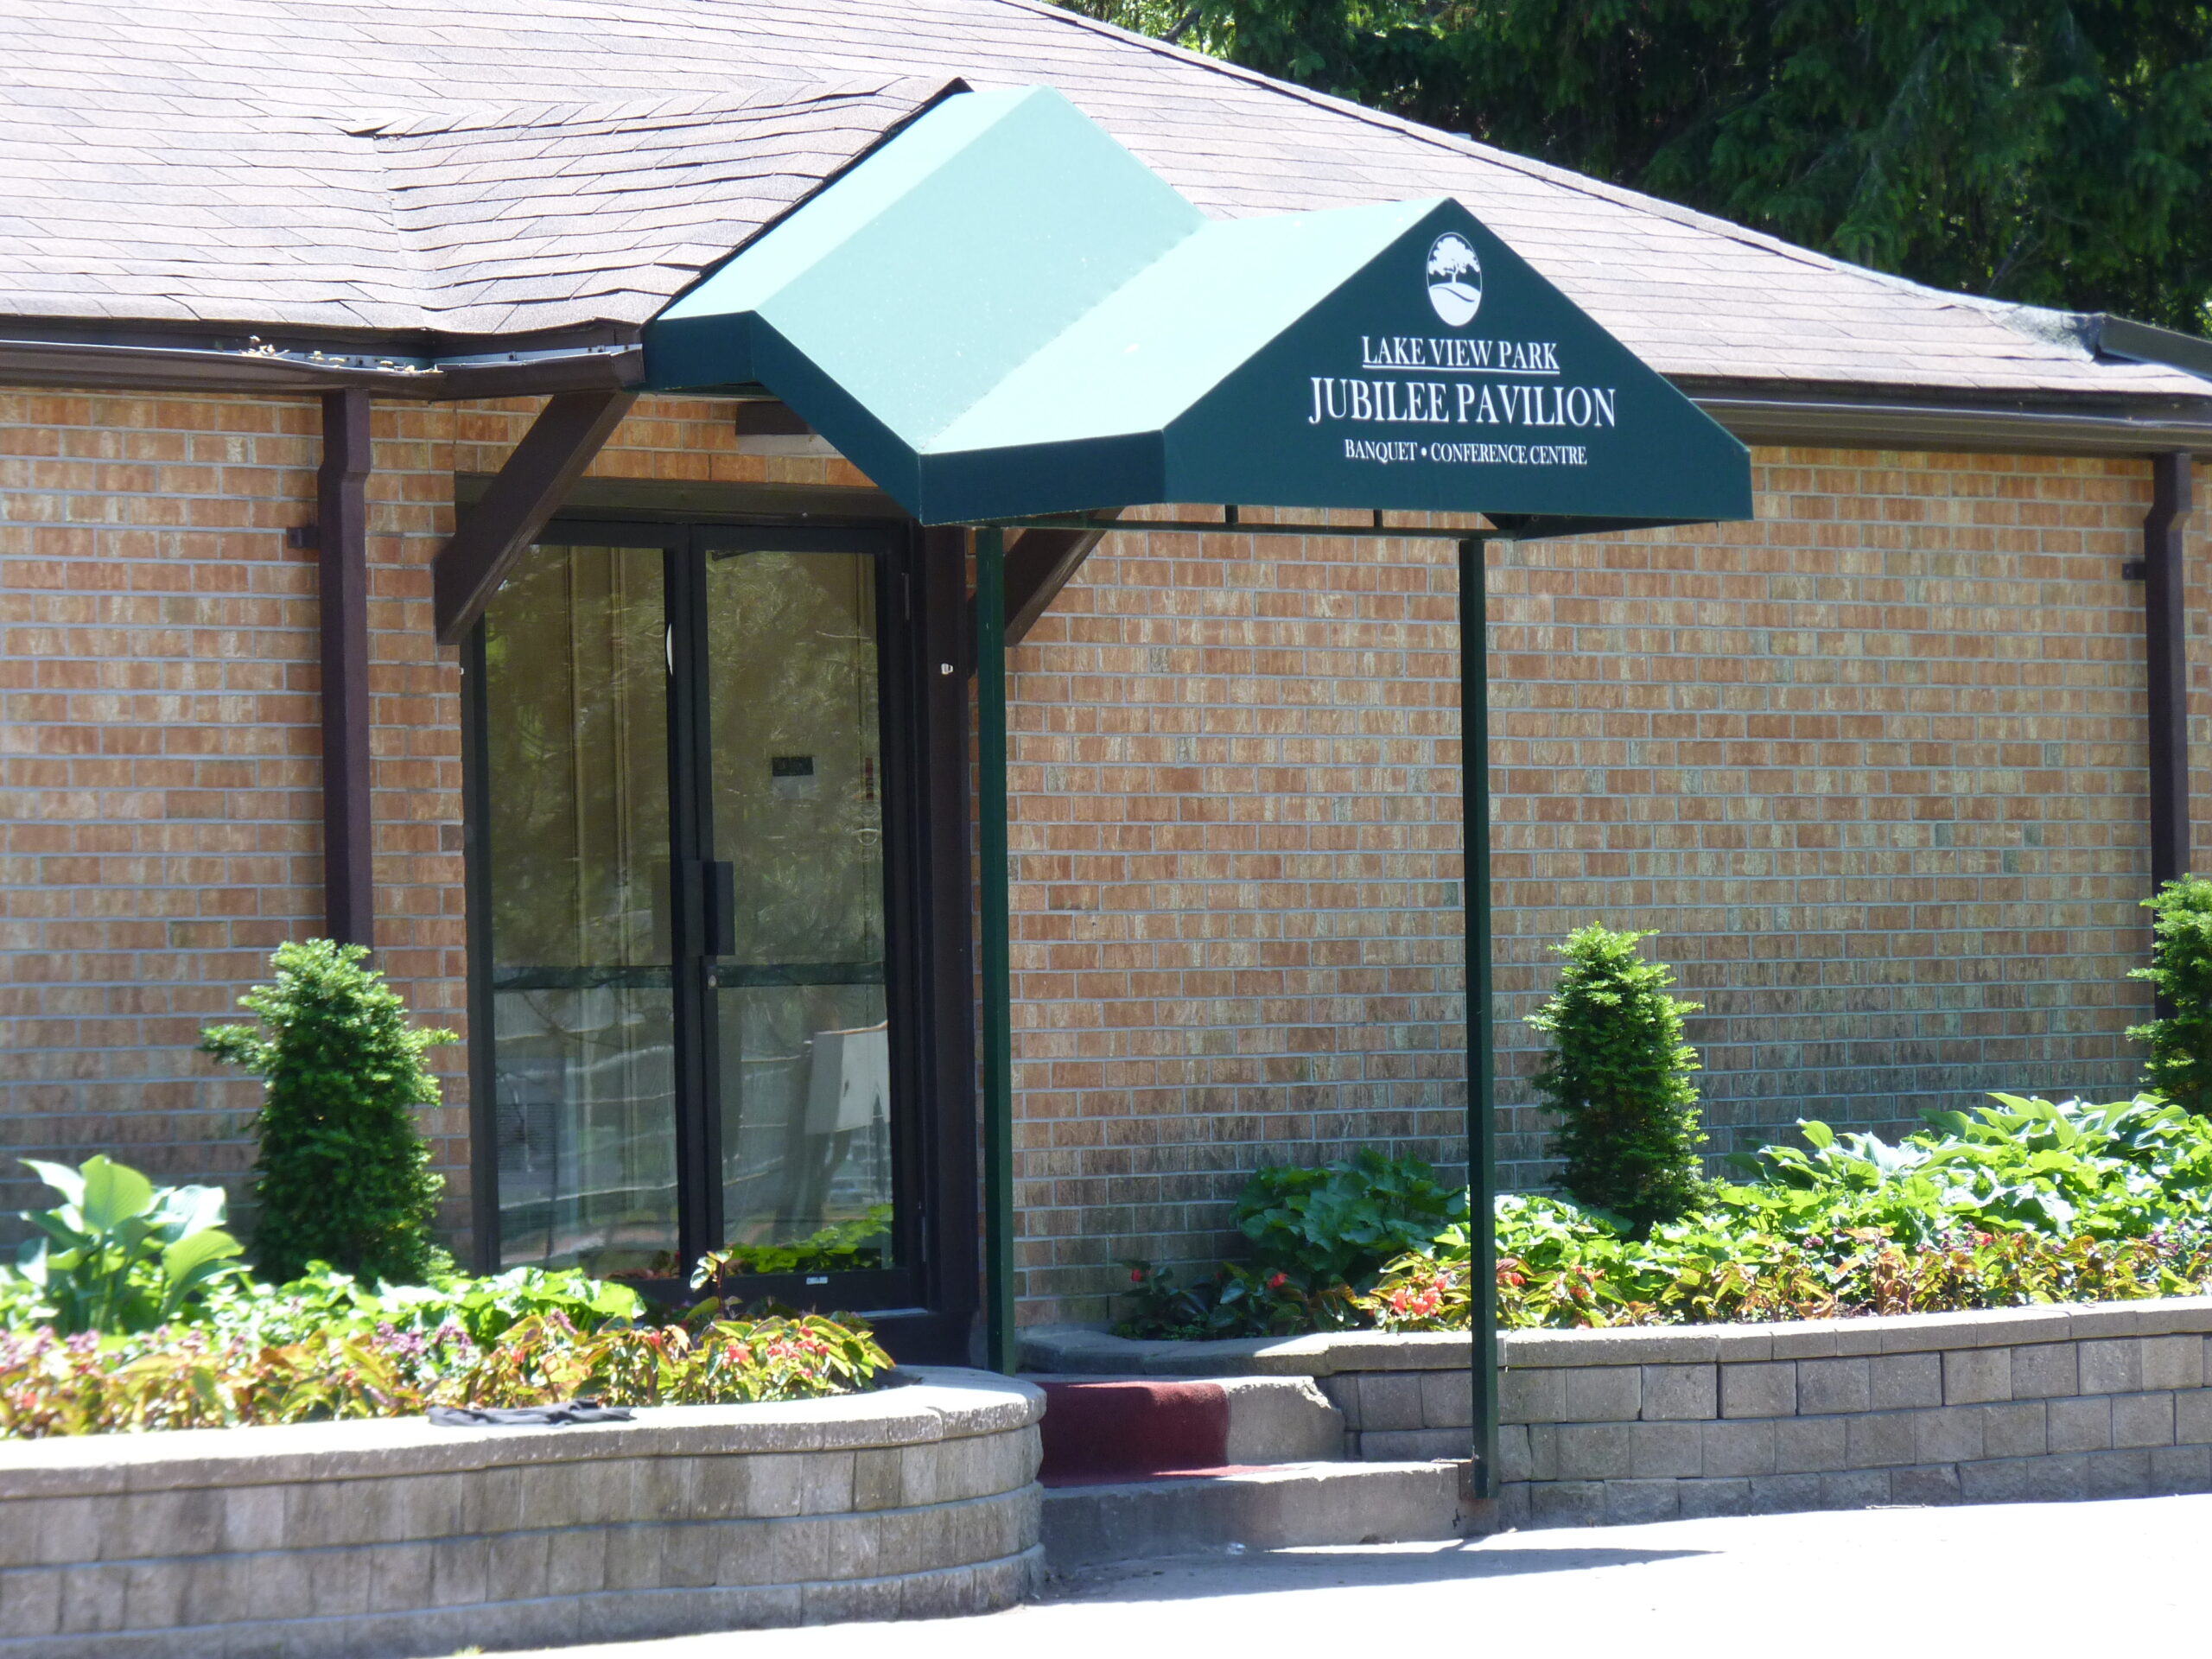 An image of the front entrance to the Jubilee Pavilion circa 2010s. There is a green metal hood over the entrance to keep the doorway shaded. There are also green plants growing in the small garden areas on either side of the door. The gardens are lined with little grey bricks serving as mini walls.